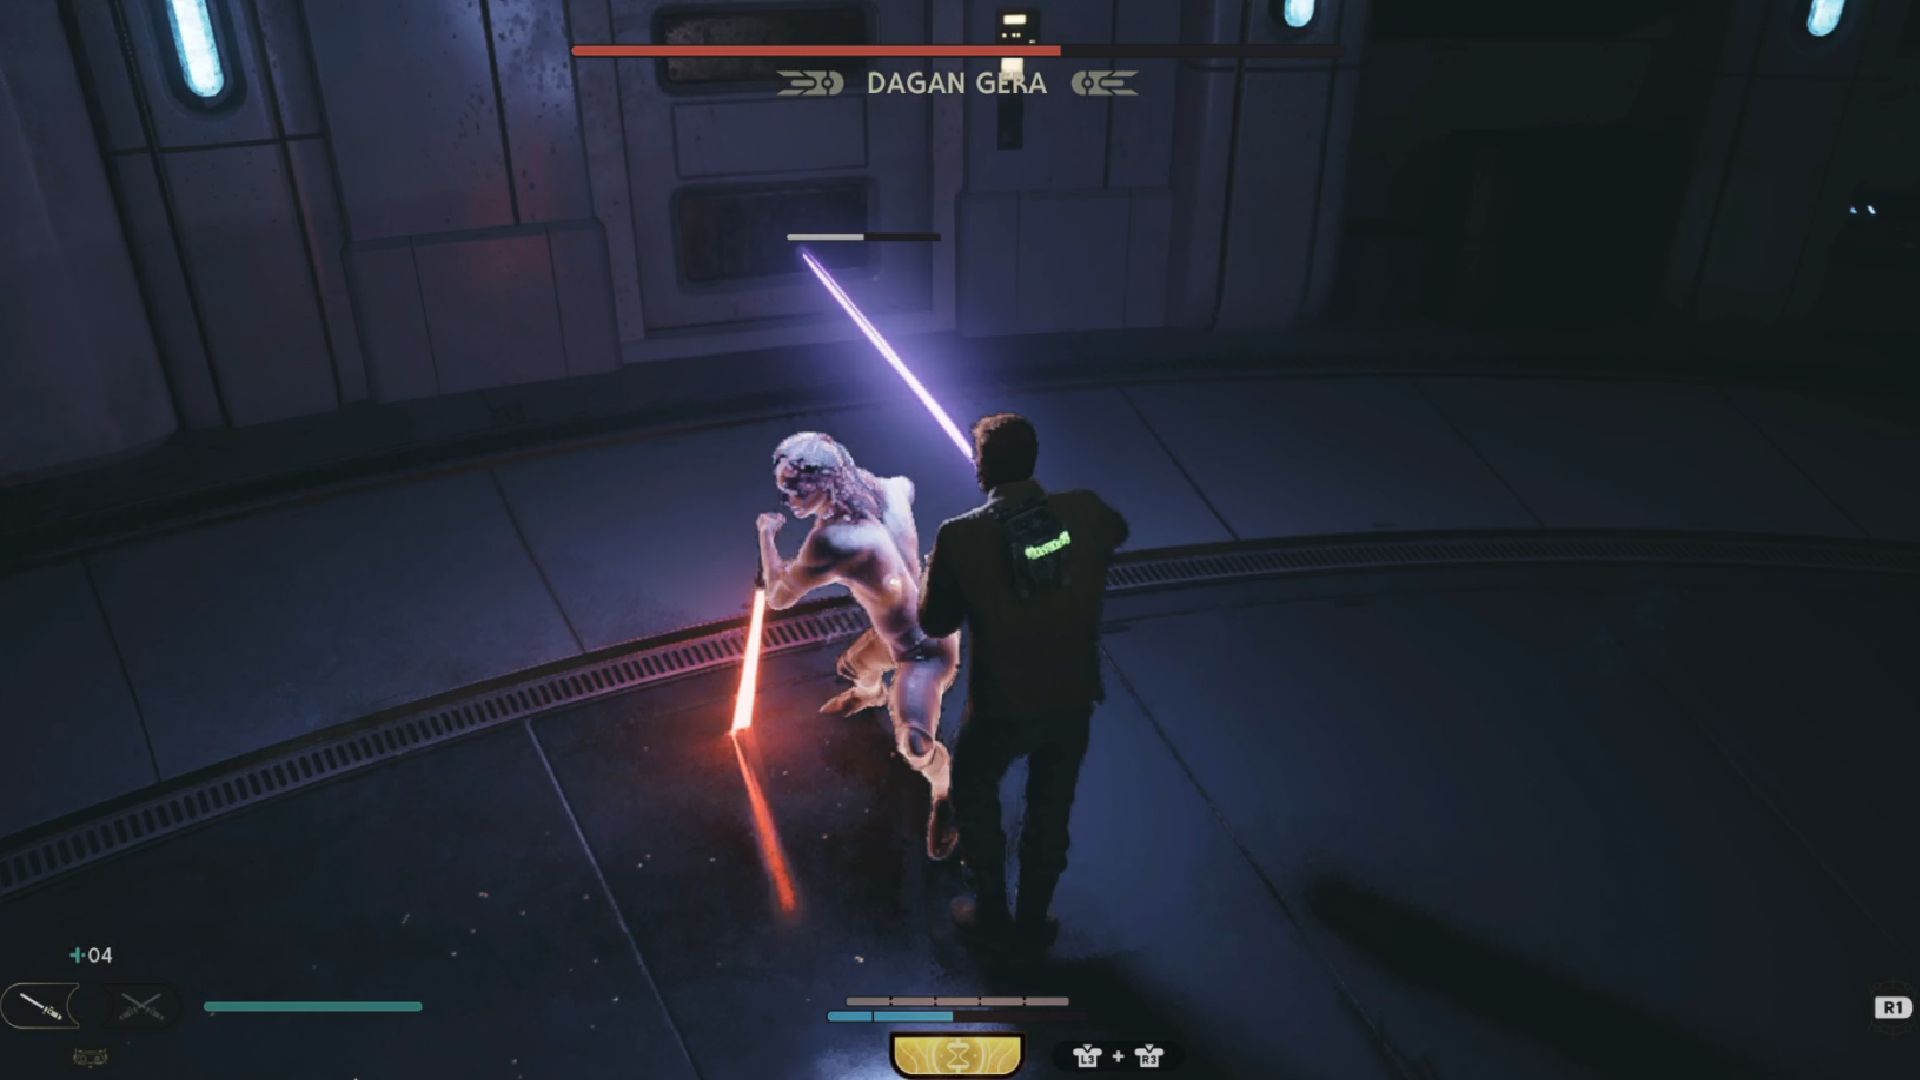 How to beat Dagan Gera in Star Wars Jedi Survivor: Dagan can be seen performing his unblockable attack